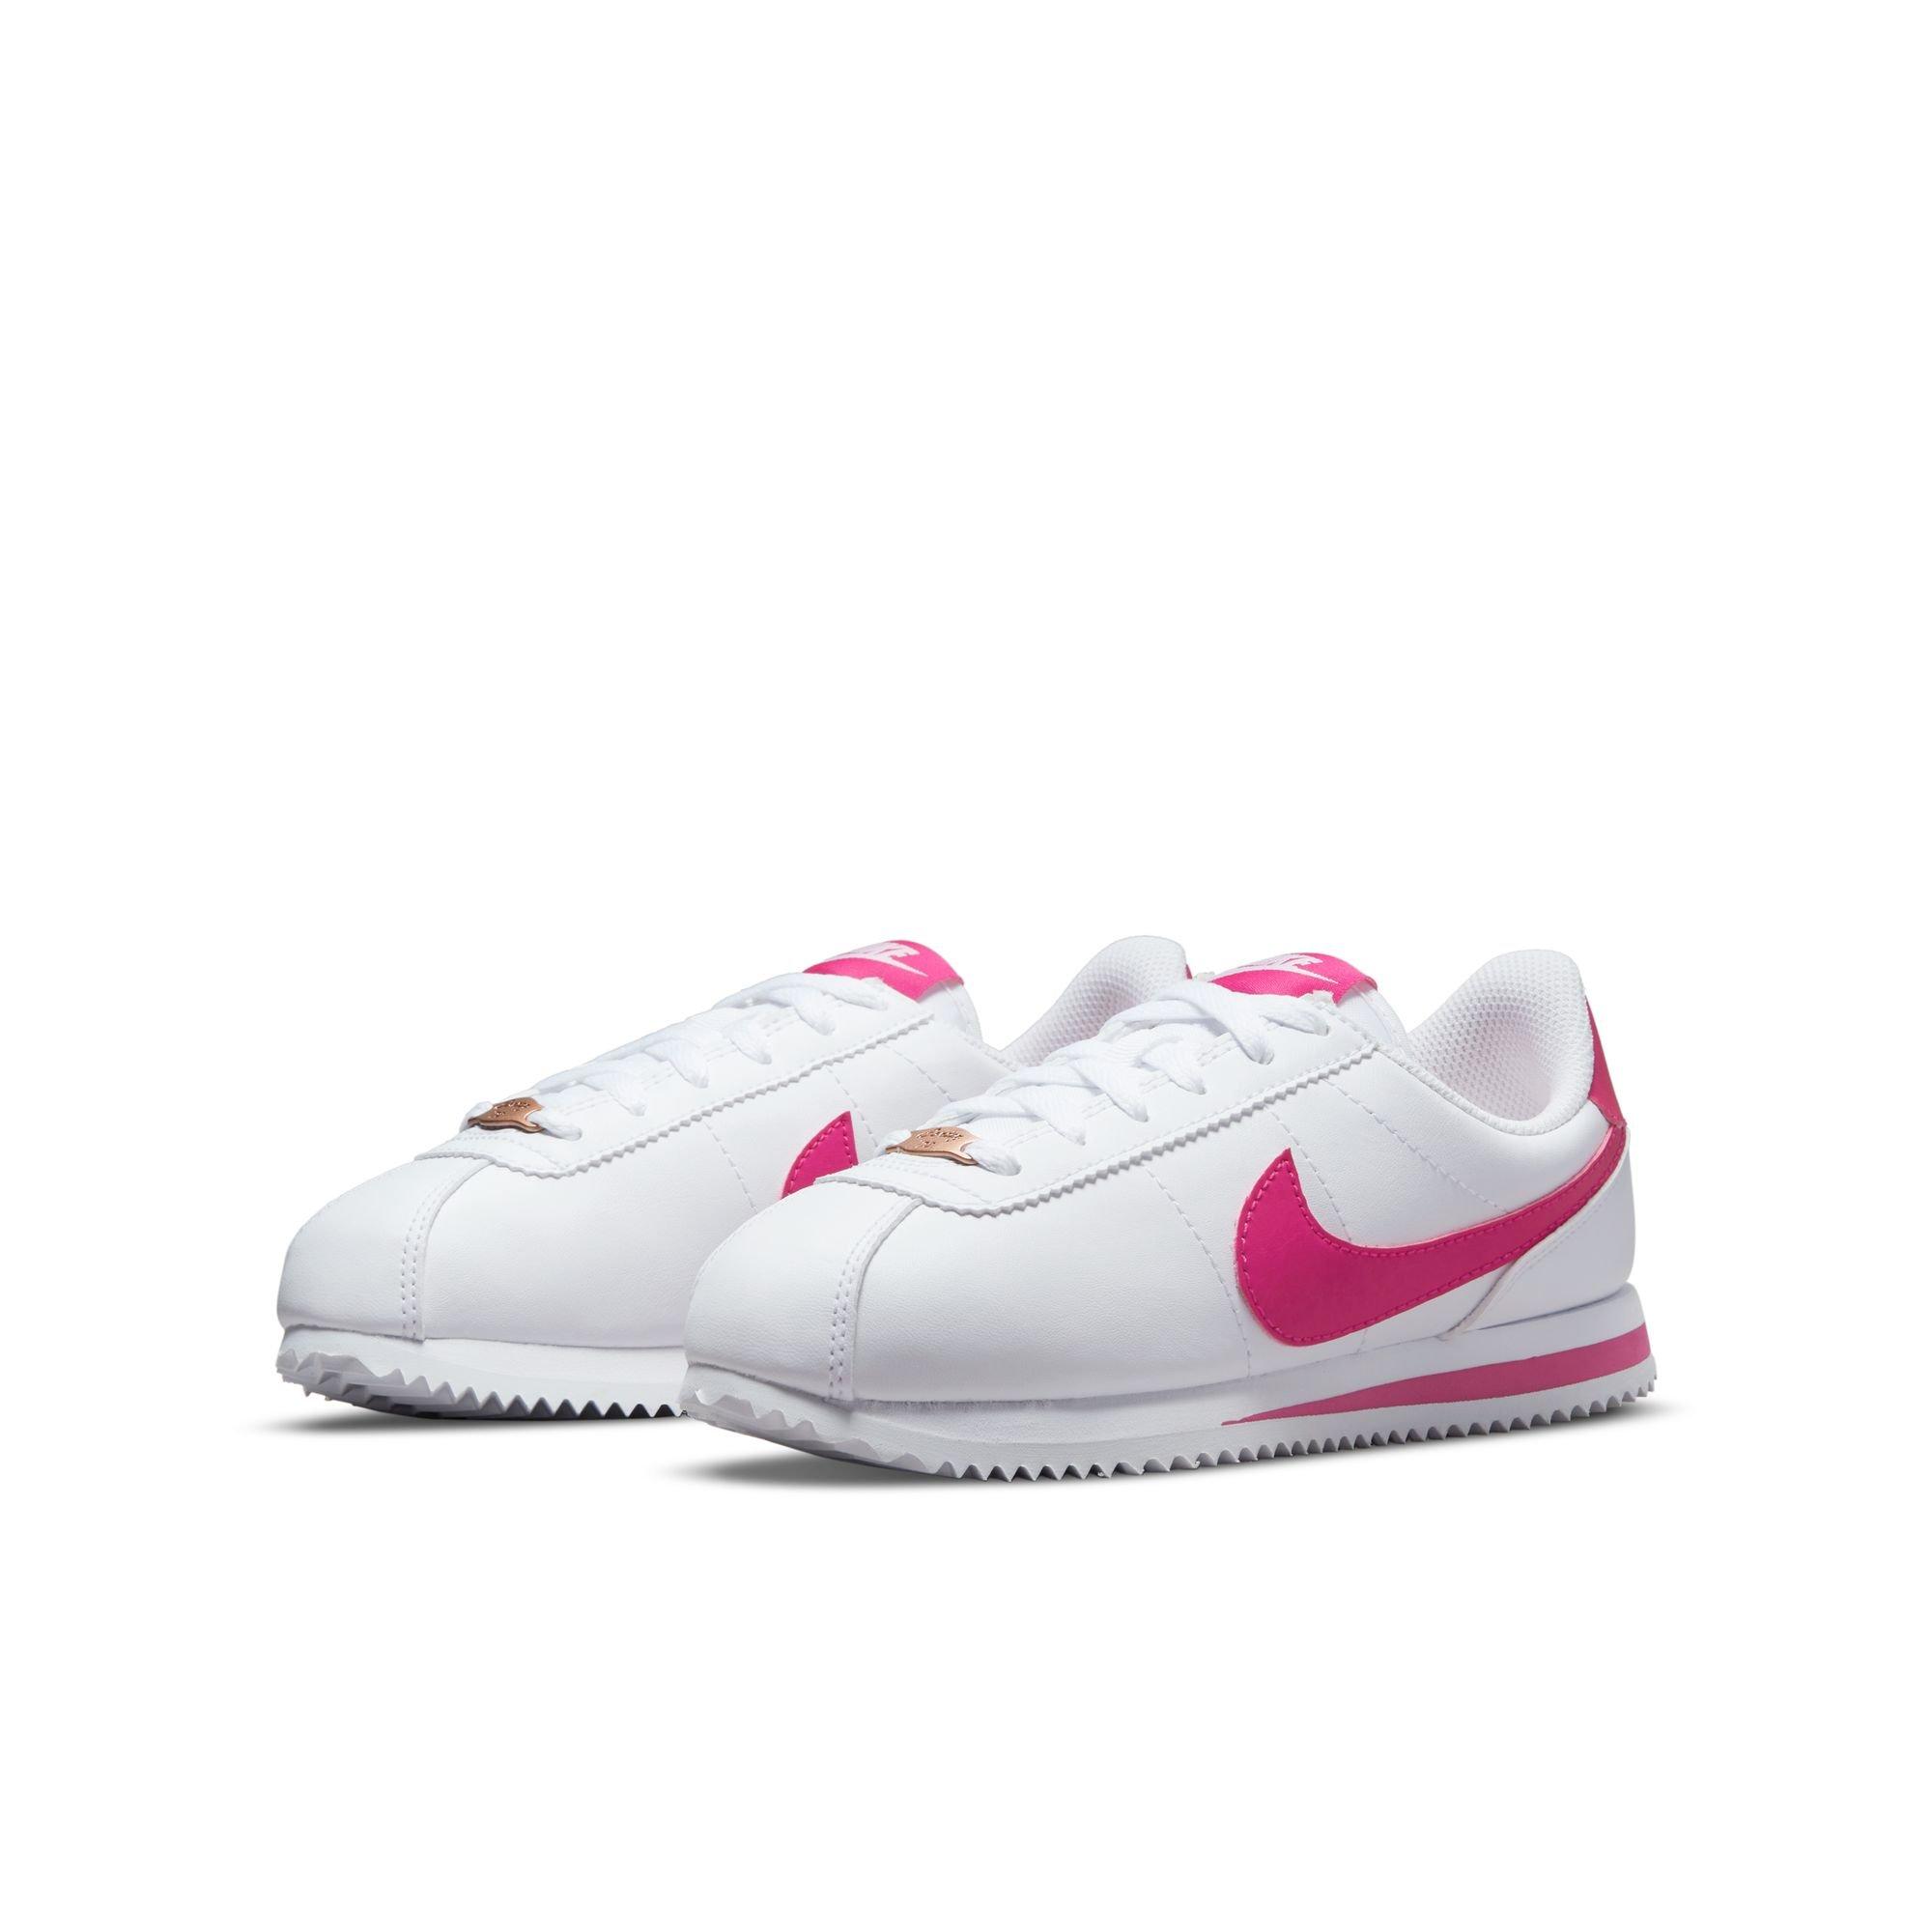 Nike Girls Cortez SE 859569-901 Rose Gold Running Shoes Sneakers Size 4Y